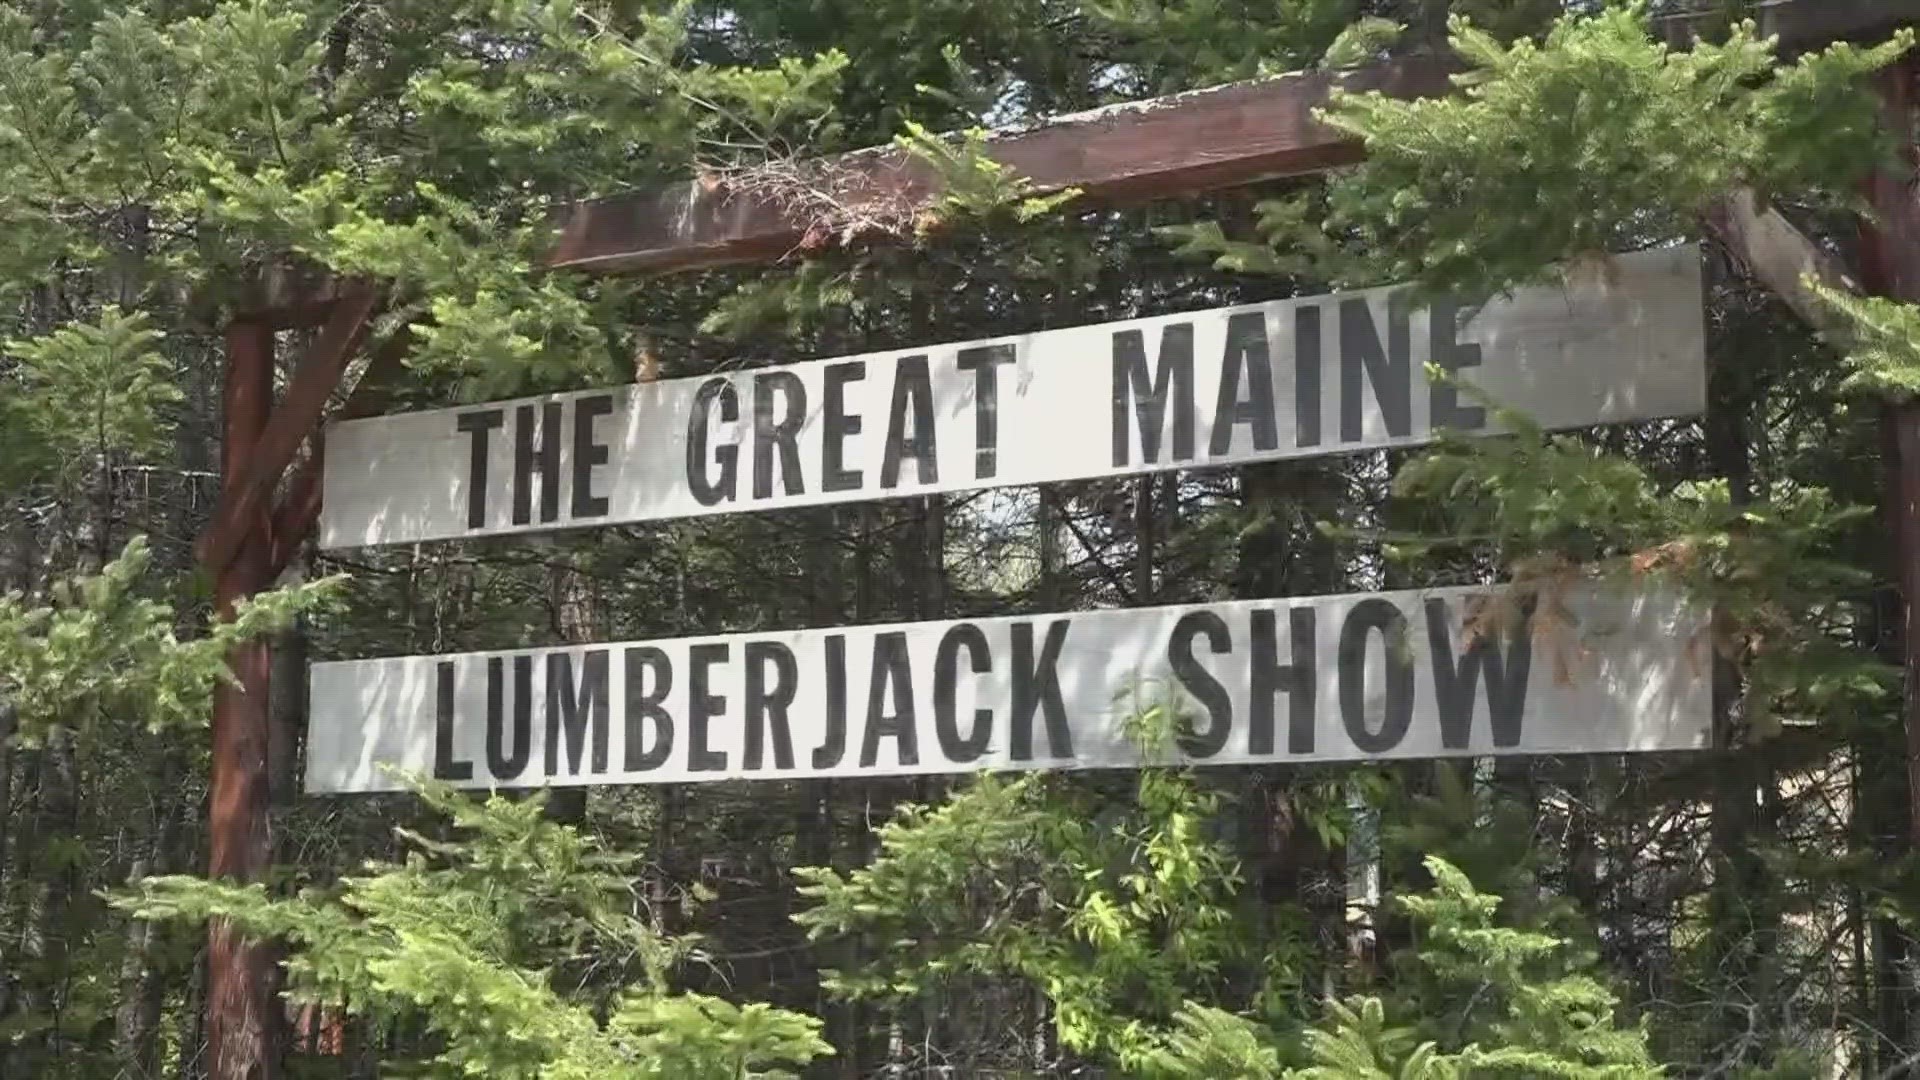 Every summer, deep in the woods of Trenton, a group of dedicated performers show off an important piece of Maine's history.